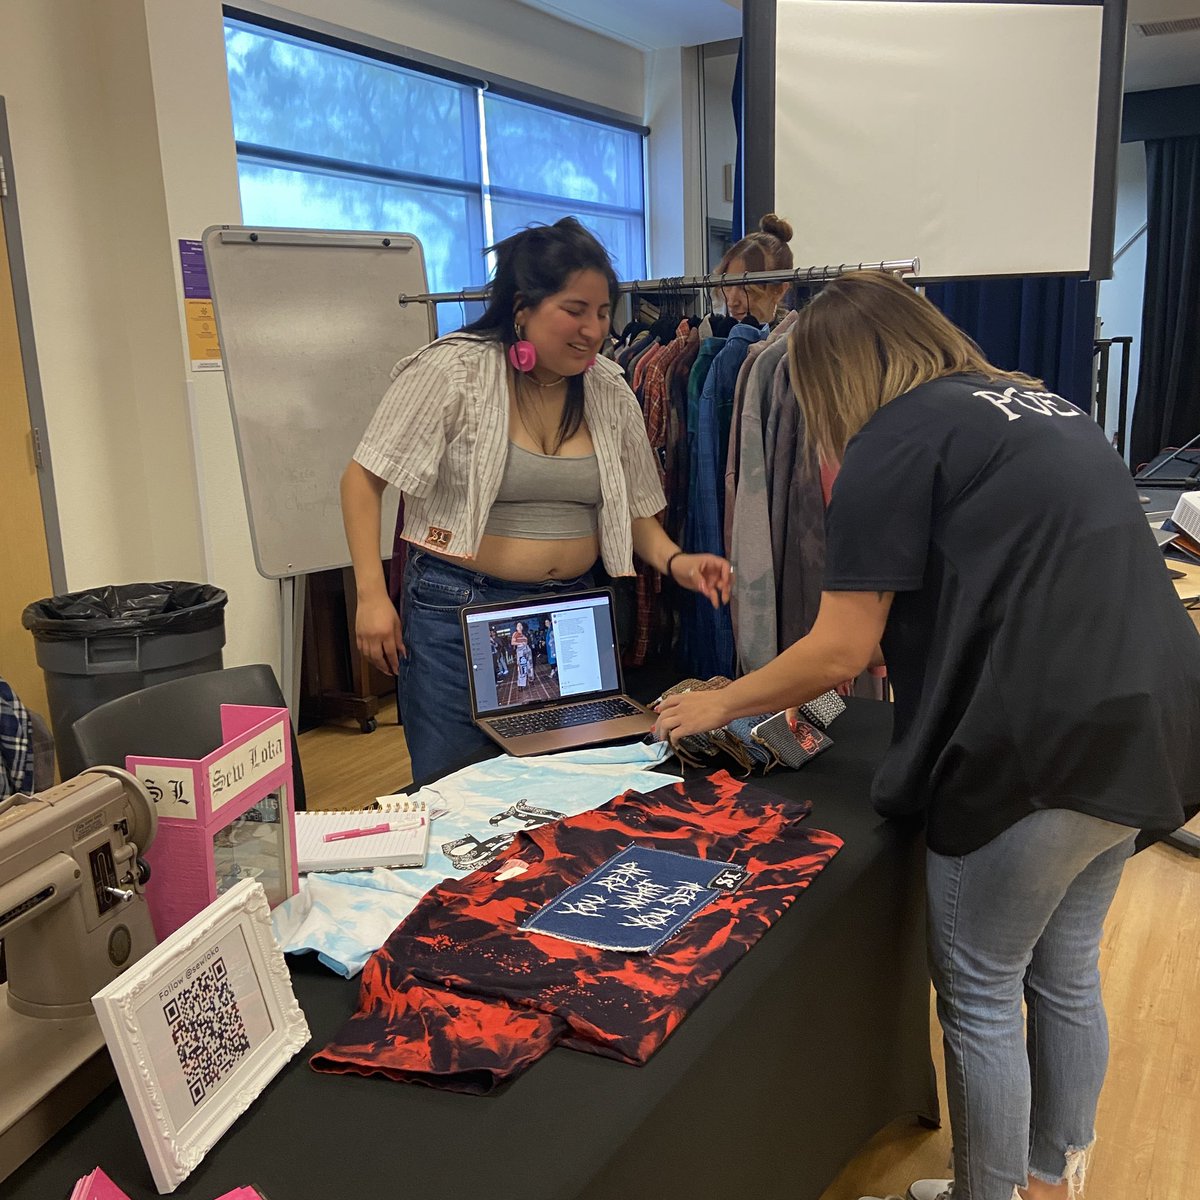 Join us at our West City Campus for the Make It Last event with the SDCCE Clothing & Textiles team! Check out the incredible 'Make It Last' installation created in partnership w/ local designer @sewloka and SDCCE students + browse vendors and workshops. We’re here until 7 p.m.!